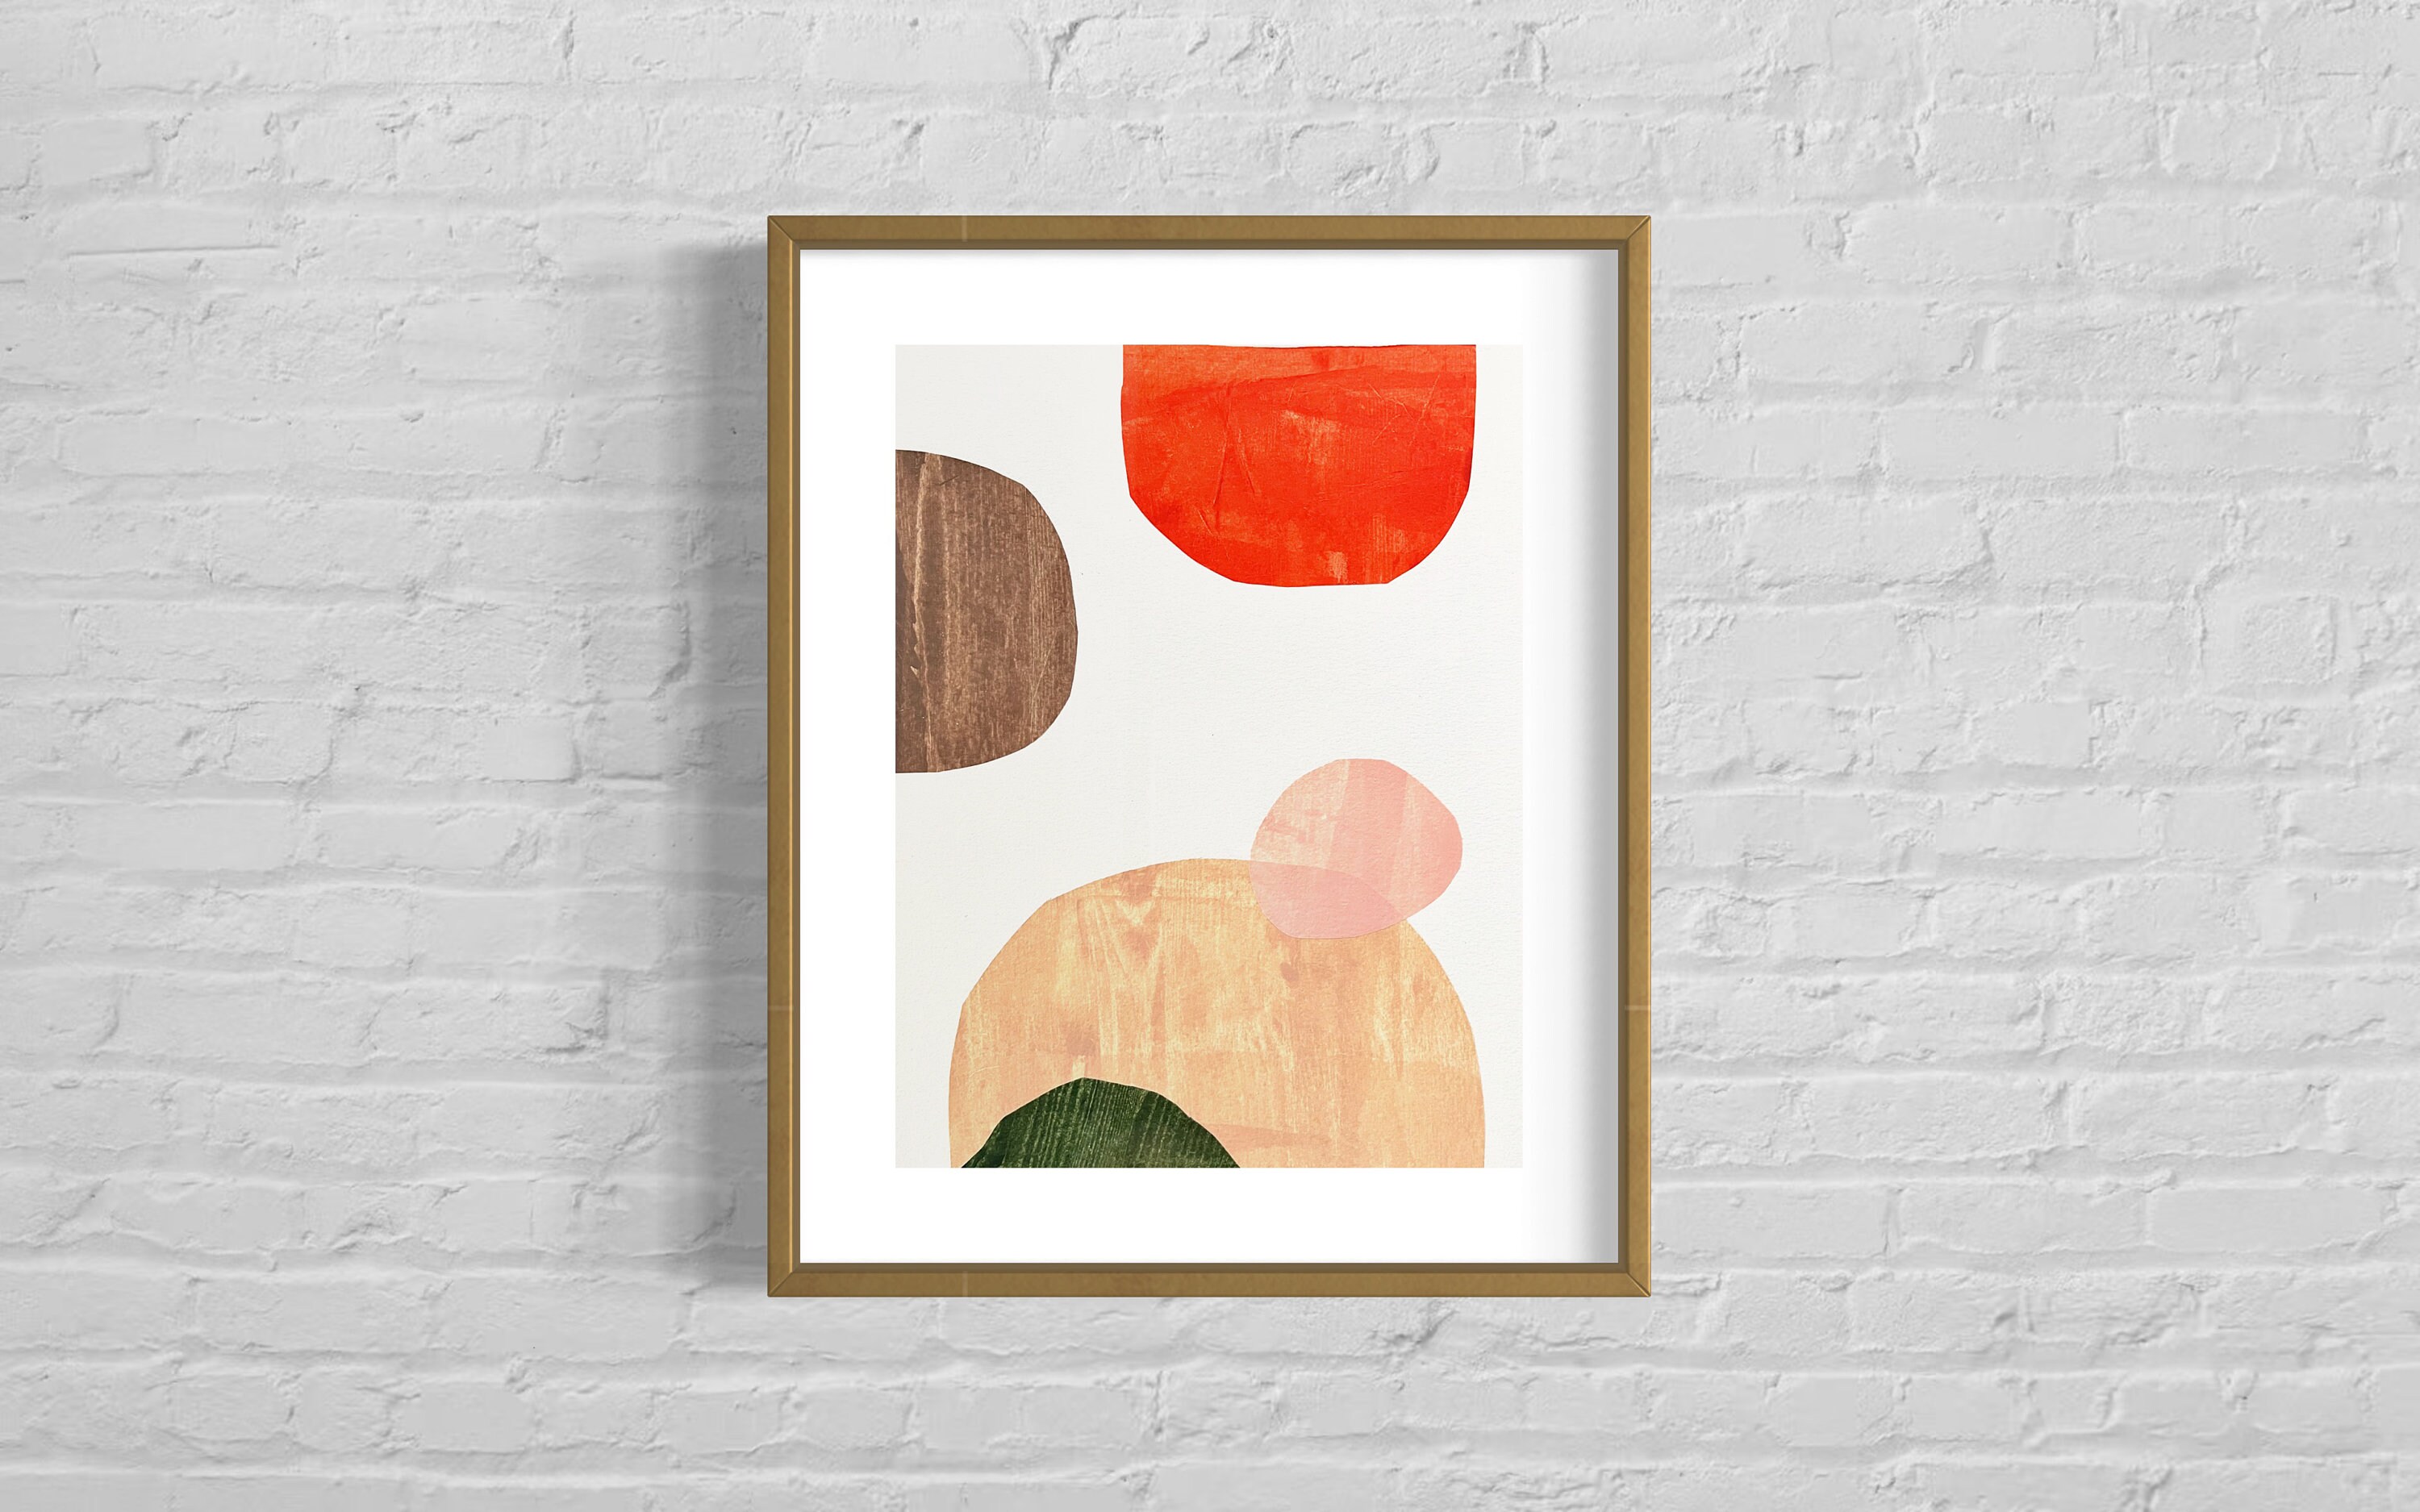 online shop offers Original abstract Collage art Cut 10 cut Paper Untitled  Colorful paper Paper/japanese collage, handmade colorful collage artwork,  ORIGINAL abstract wall art, abstract collage artwork, modern art 